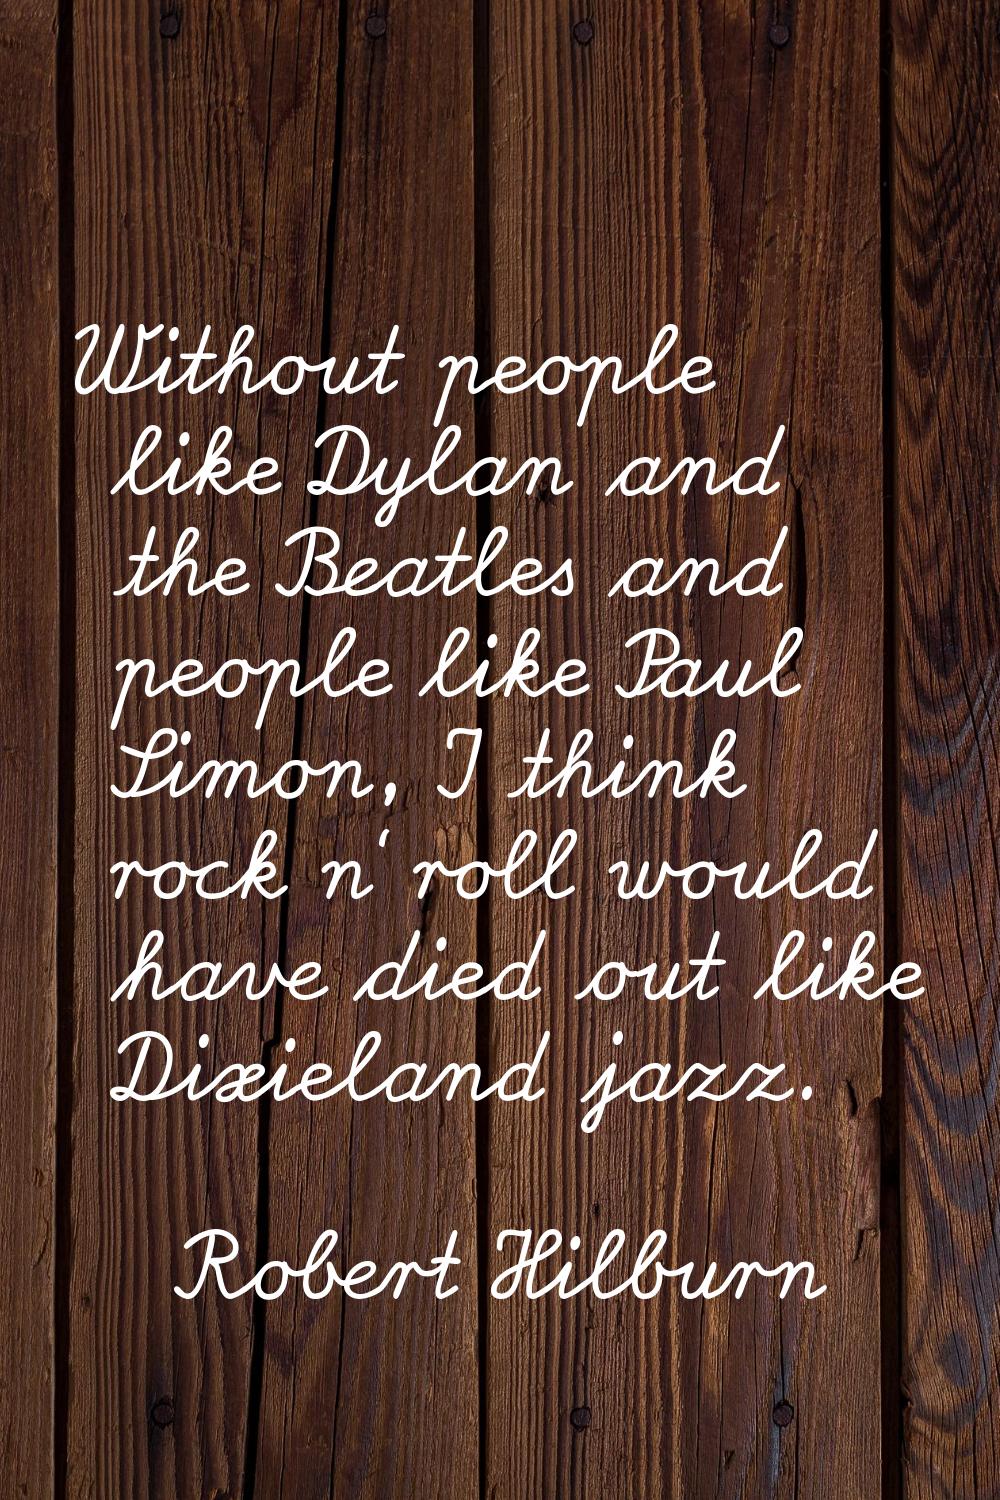 Without people like Dylan and the Beatles and people like Paul Simon, I think rock n' roll would ha